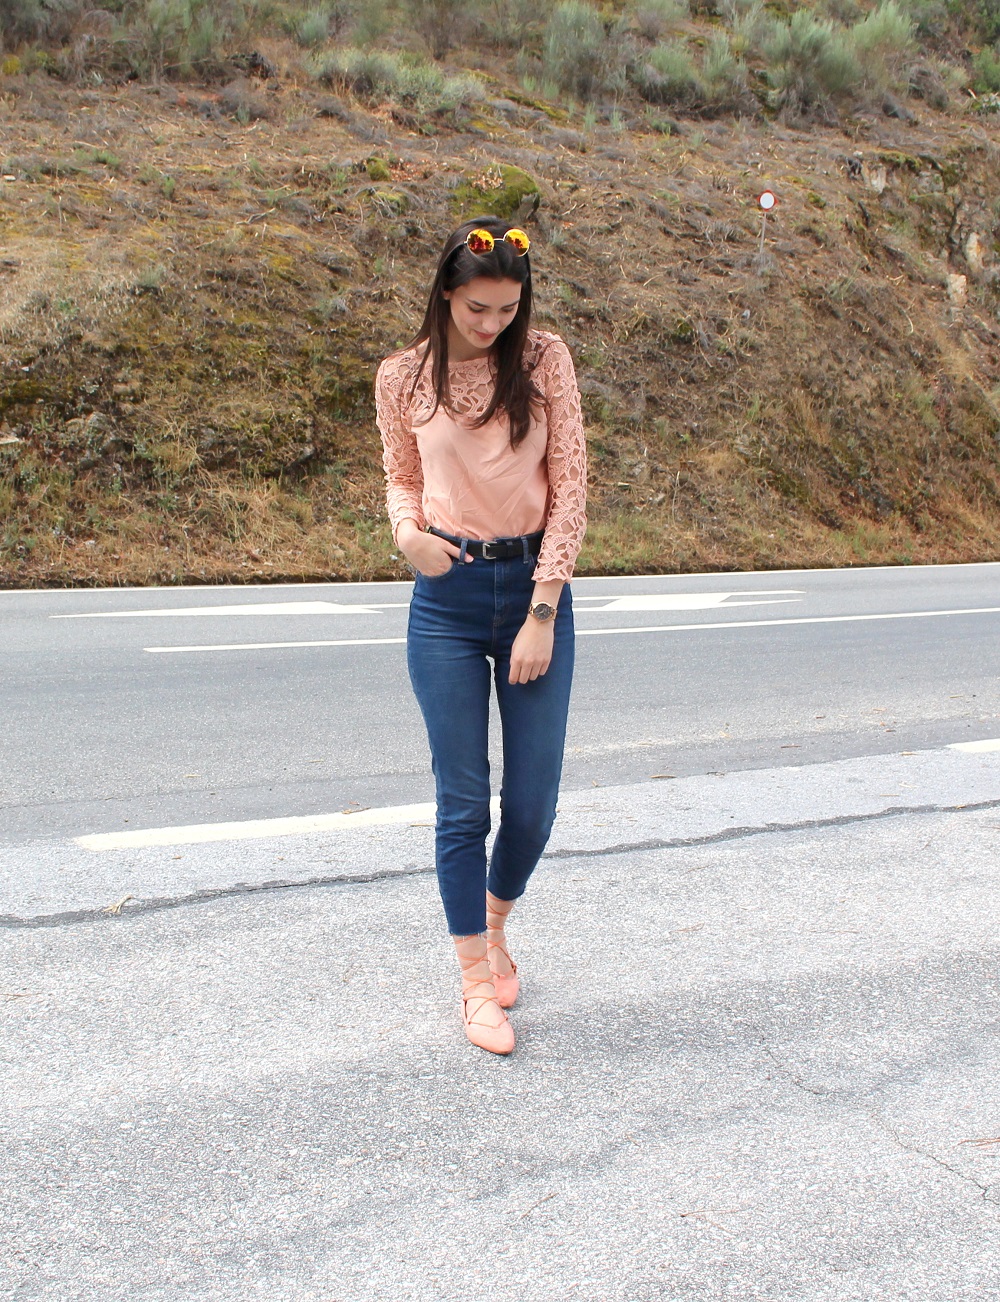 peexo-fashion-blogger-wearing-lace-top-and-topshop-binx-jeans-and-lace-up-flats-and-rose-gold-sunglasses